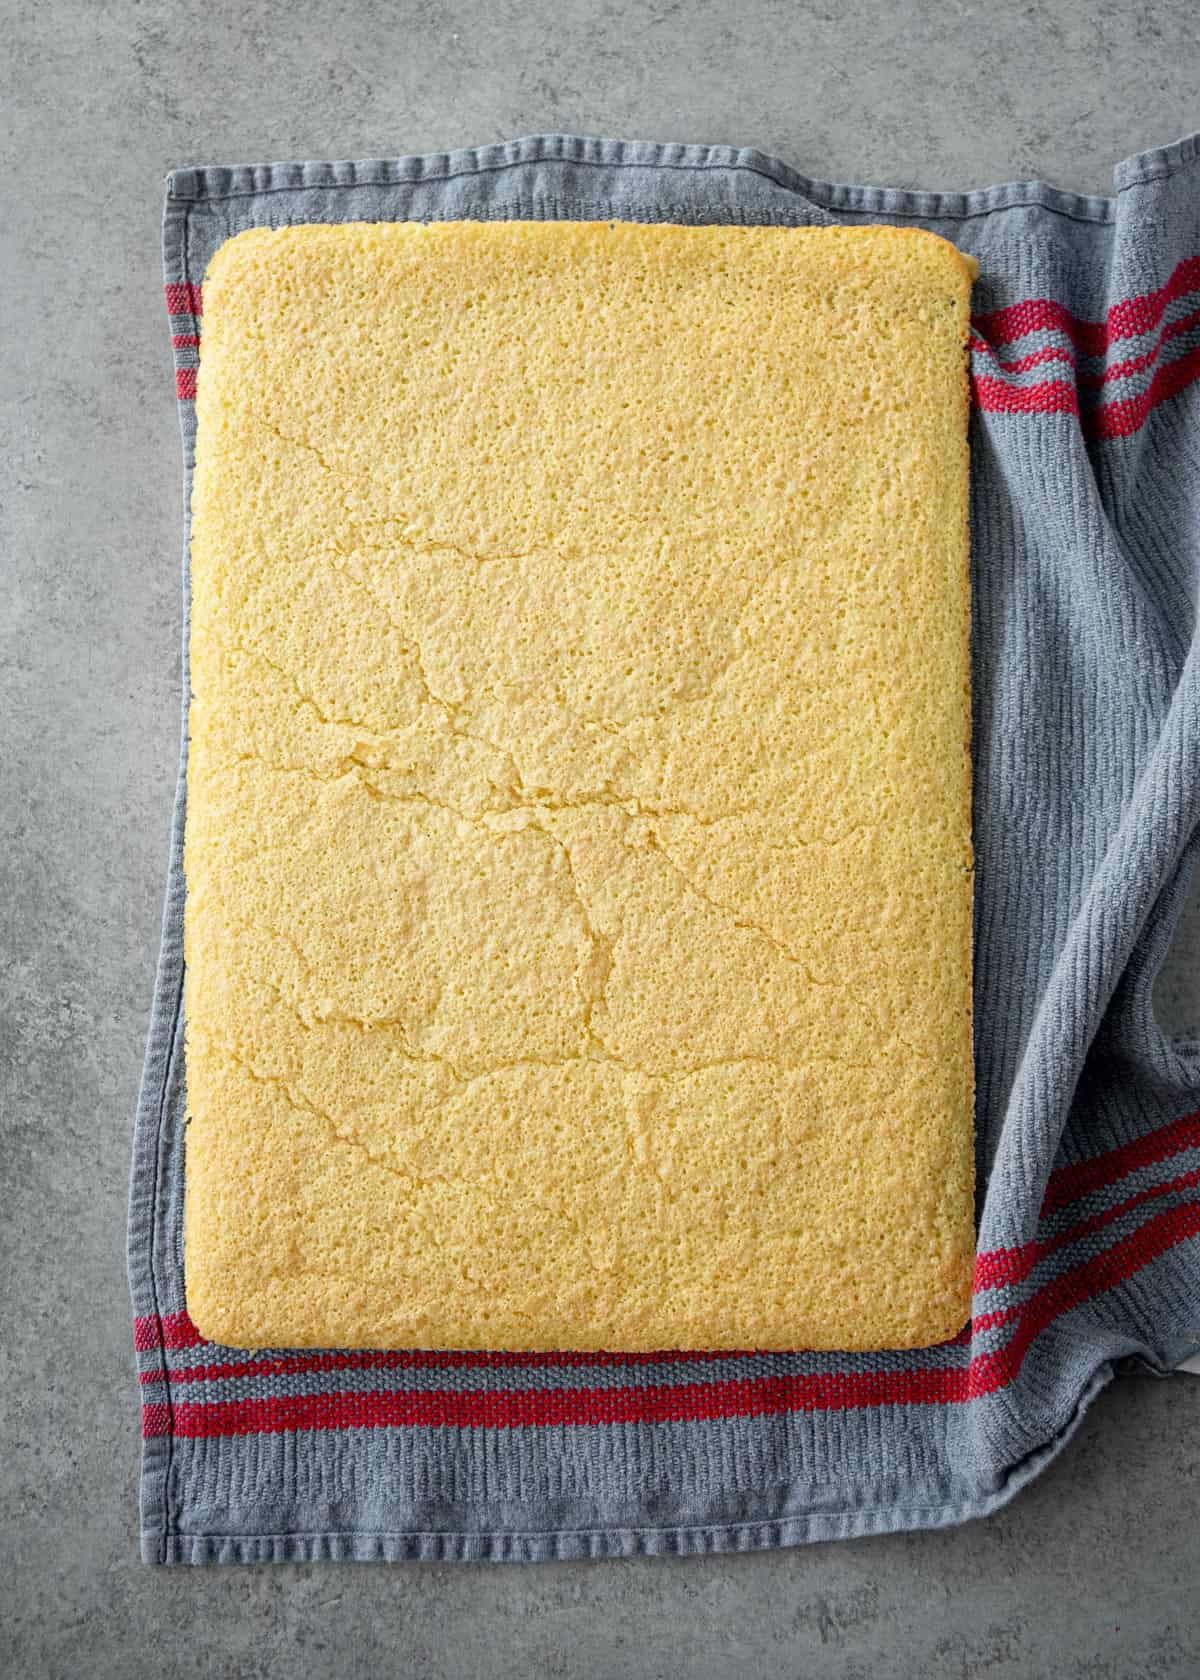 a baked cake on a dish towel